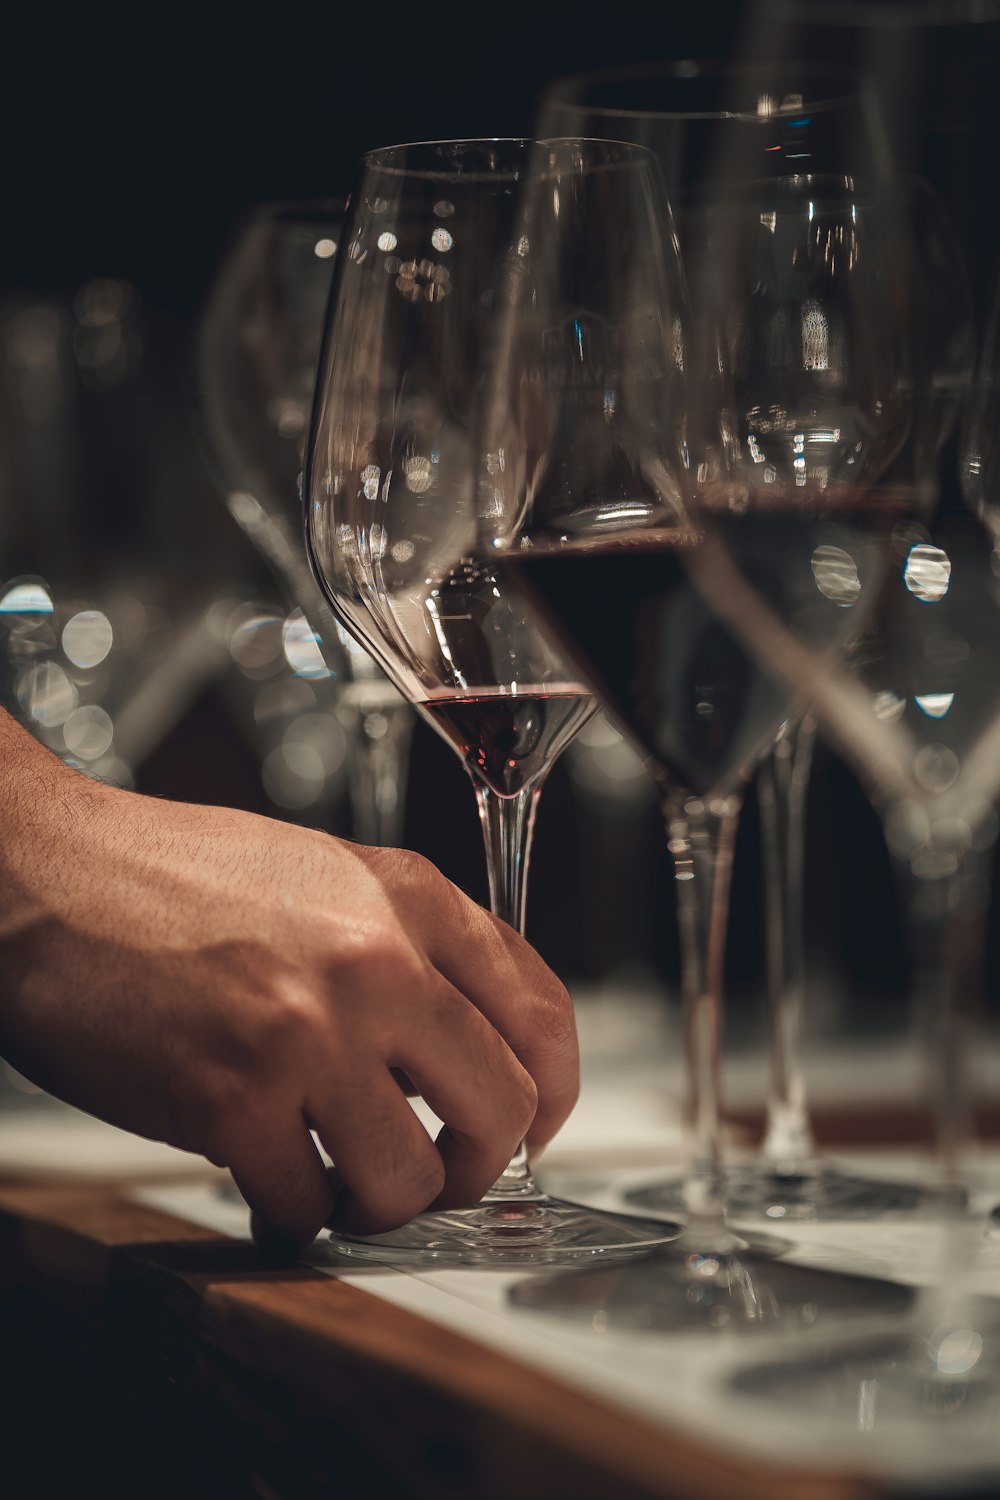 a person's hand touching a glass of wine